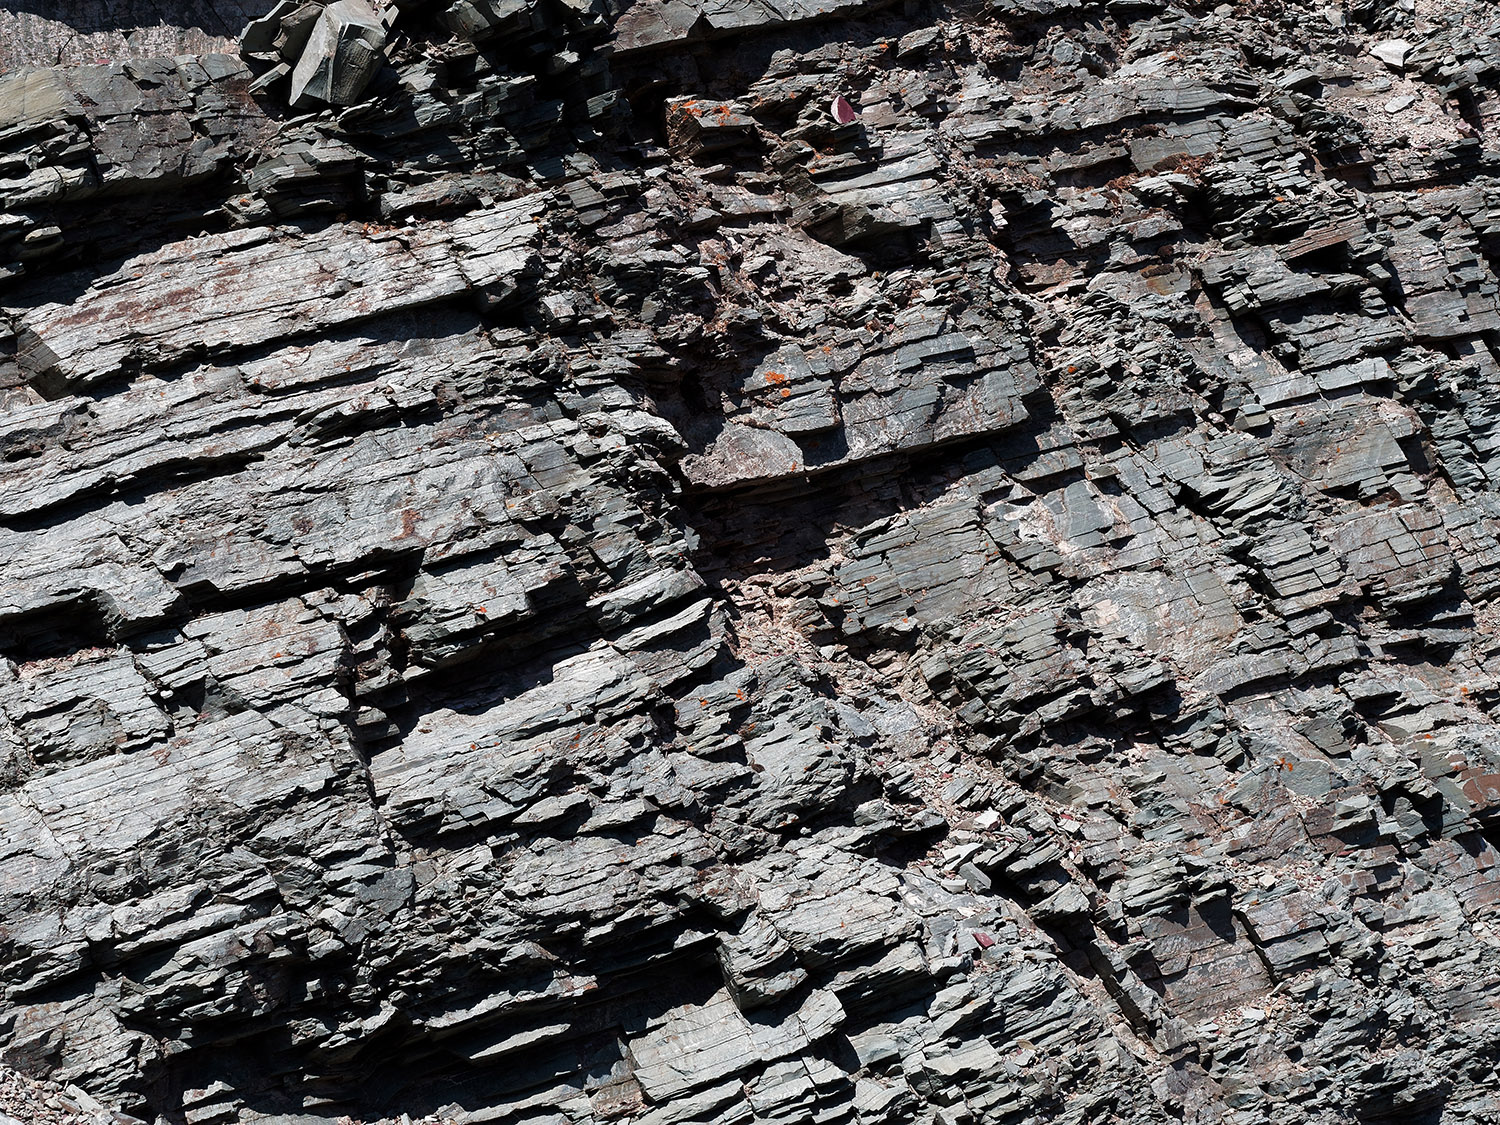 Laminated beds composed mostly of argillite in the Appekunny formation.